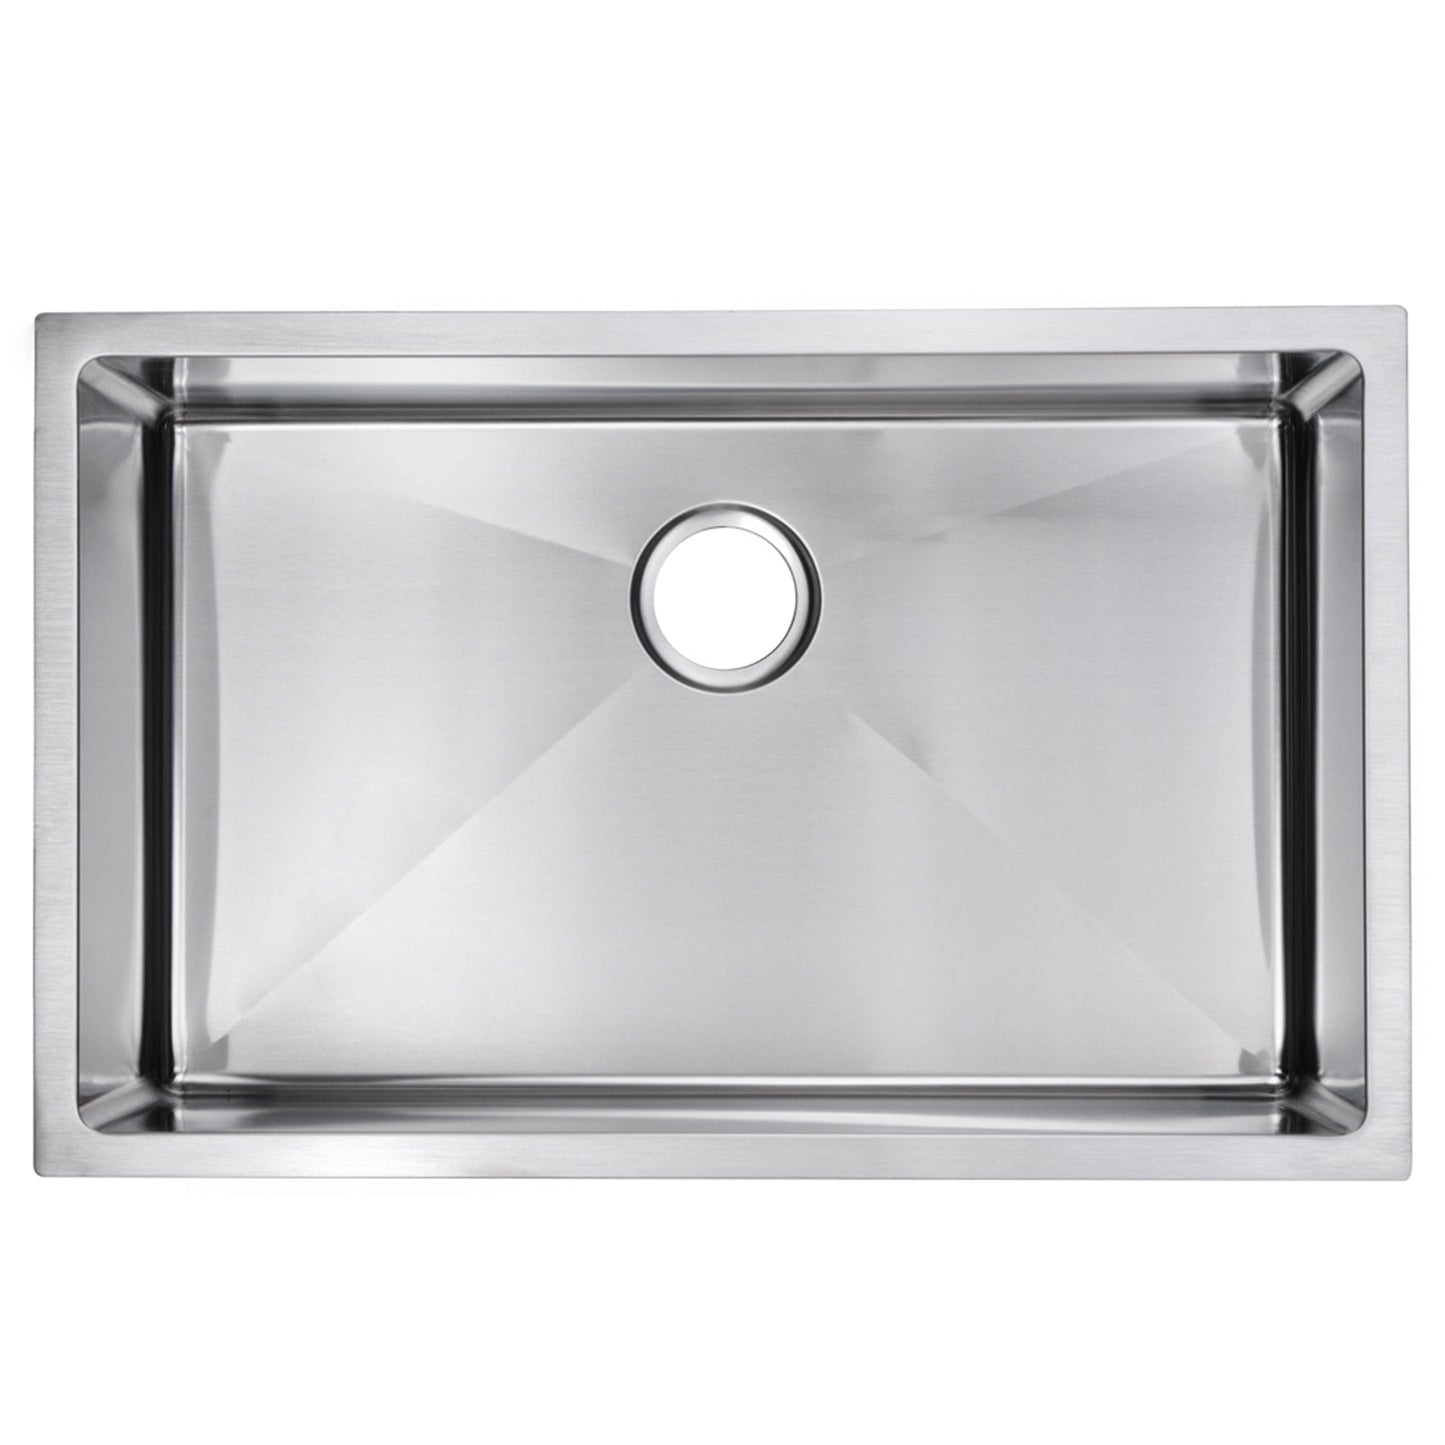 Water Creation 30 Inch X 19 Inch 15mm Corner Radius Single Bowl Stainless Steel Hand Made Undermount Kitchen Sink With Drain and Strainer